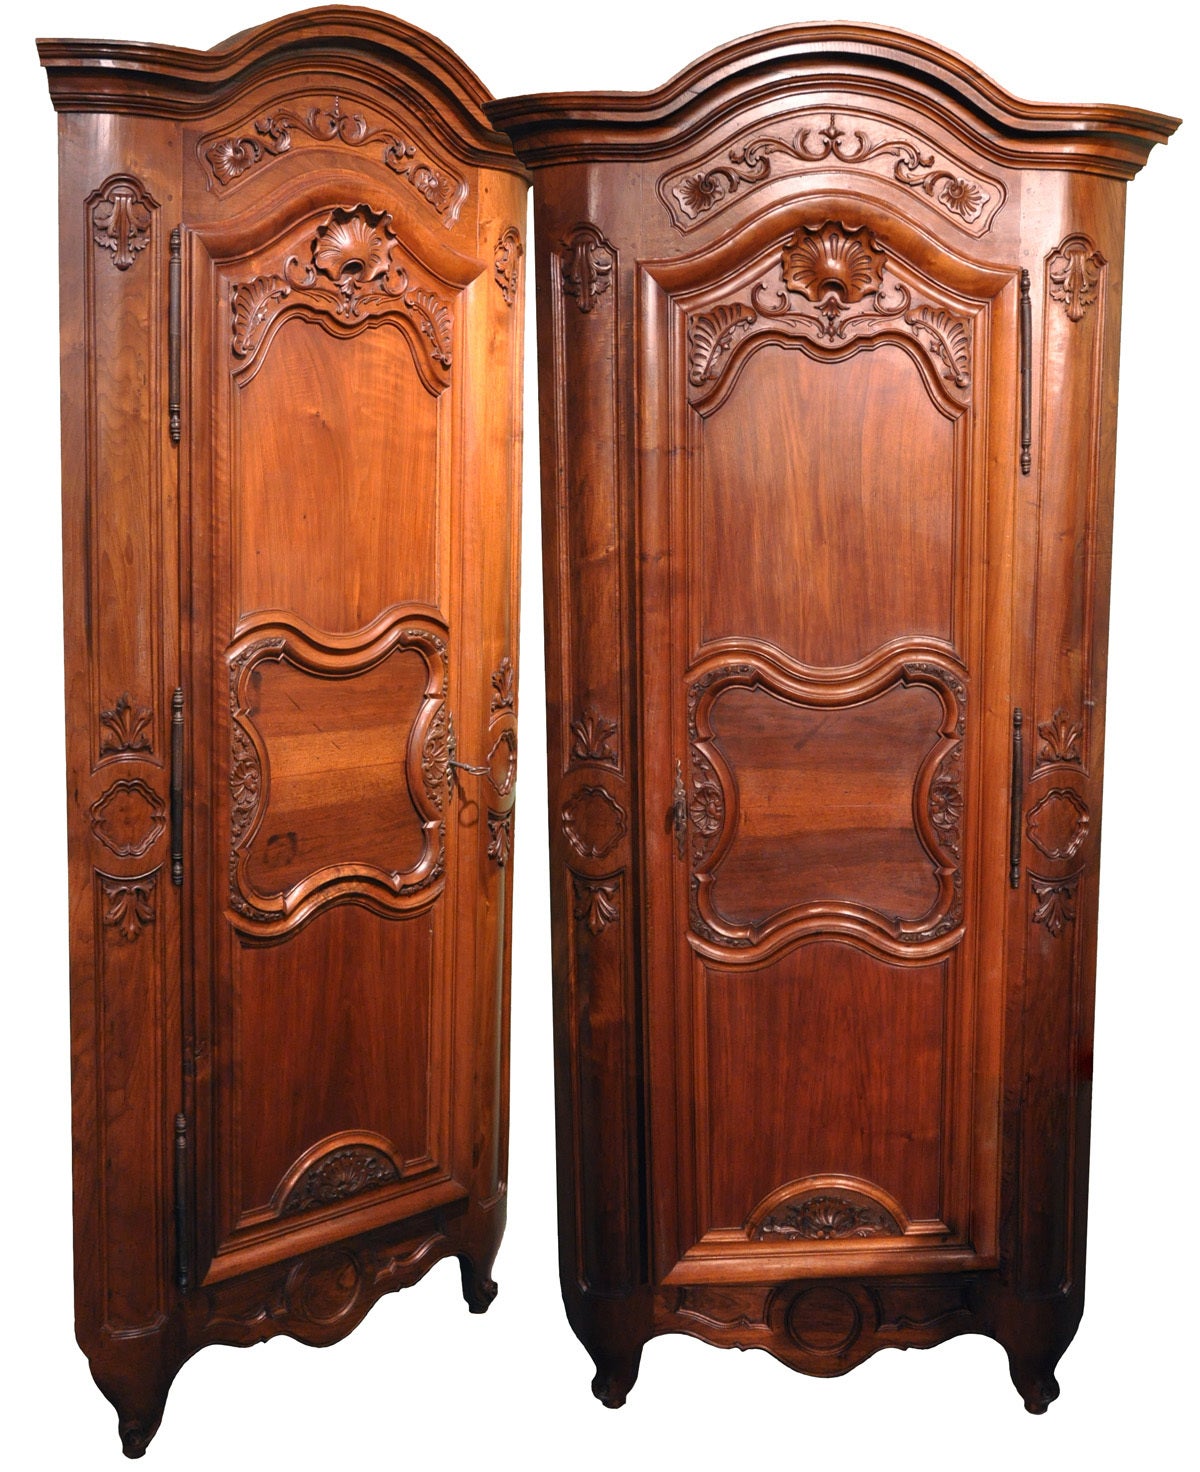 Pair of Large French Walnut Corner Cabinets from Lyon